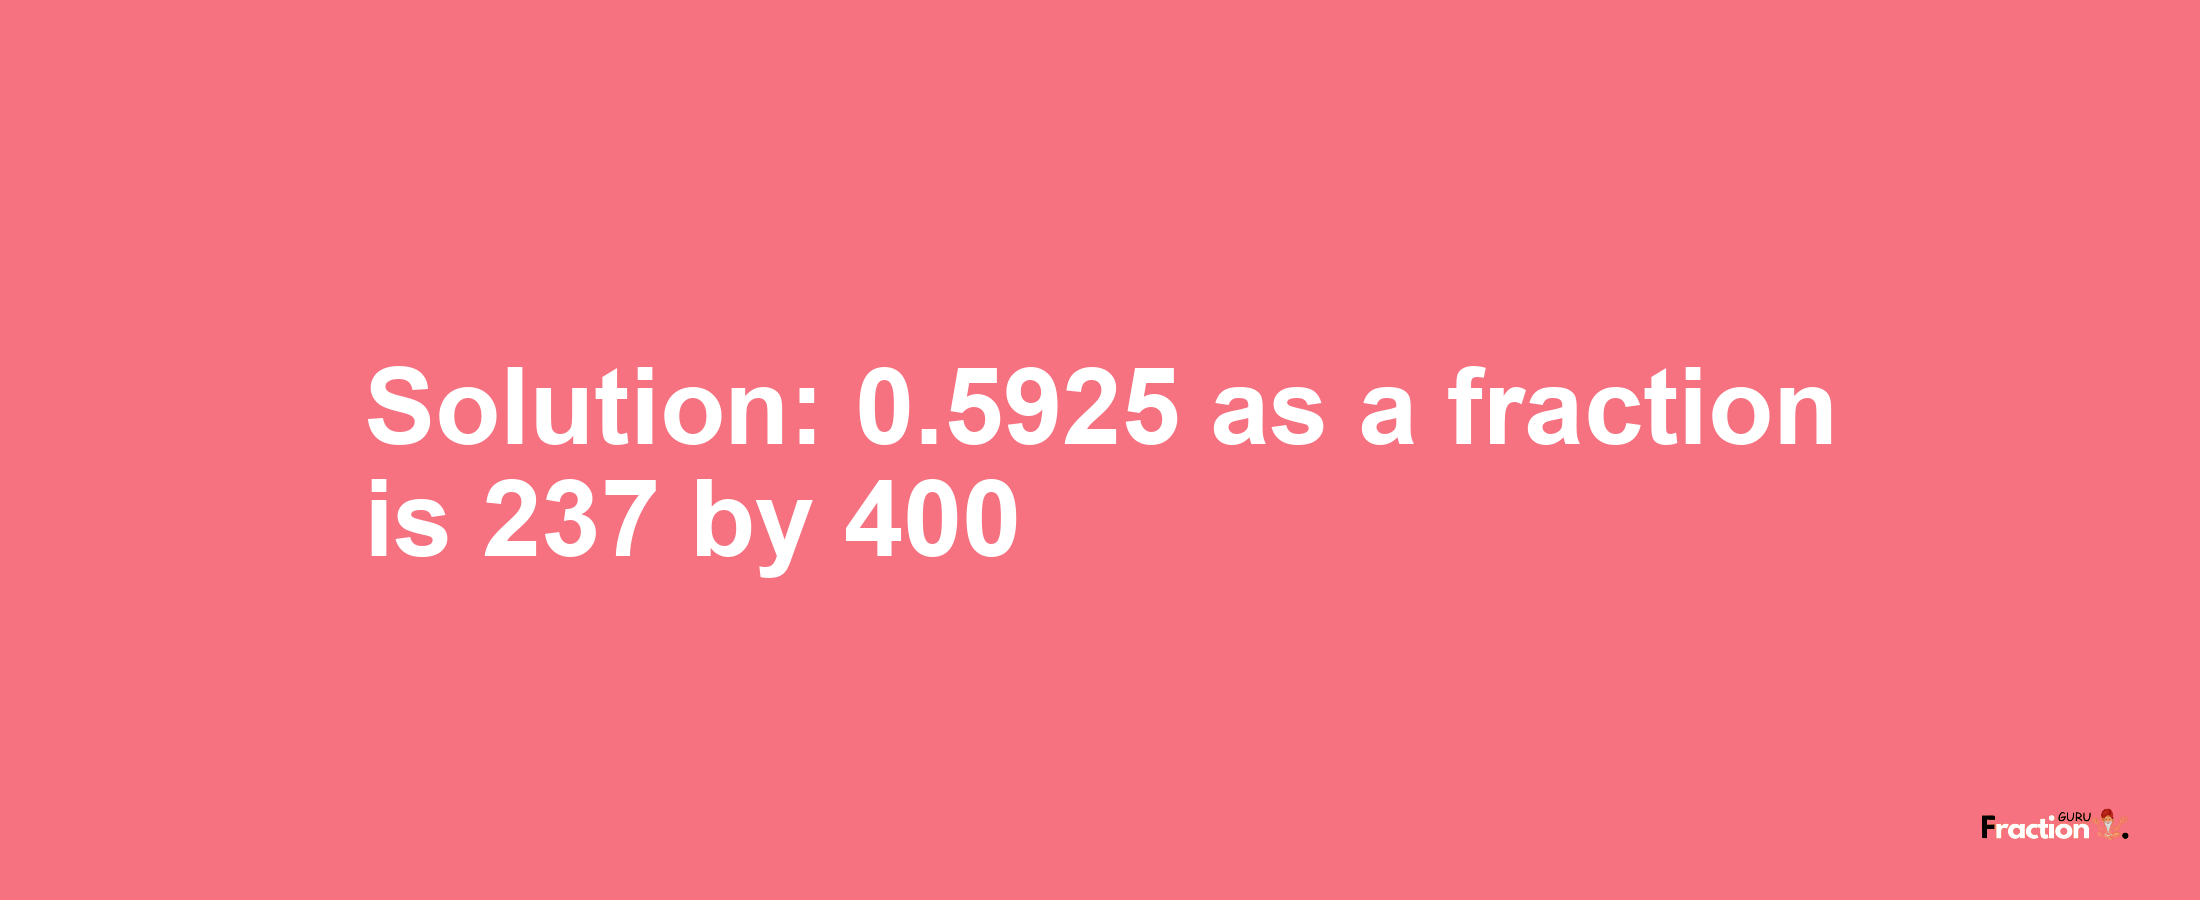 Solution:0.5925 as a fraction is 237/400